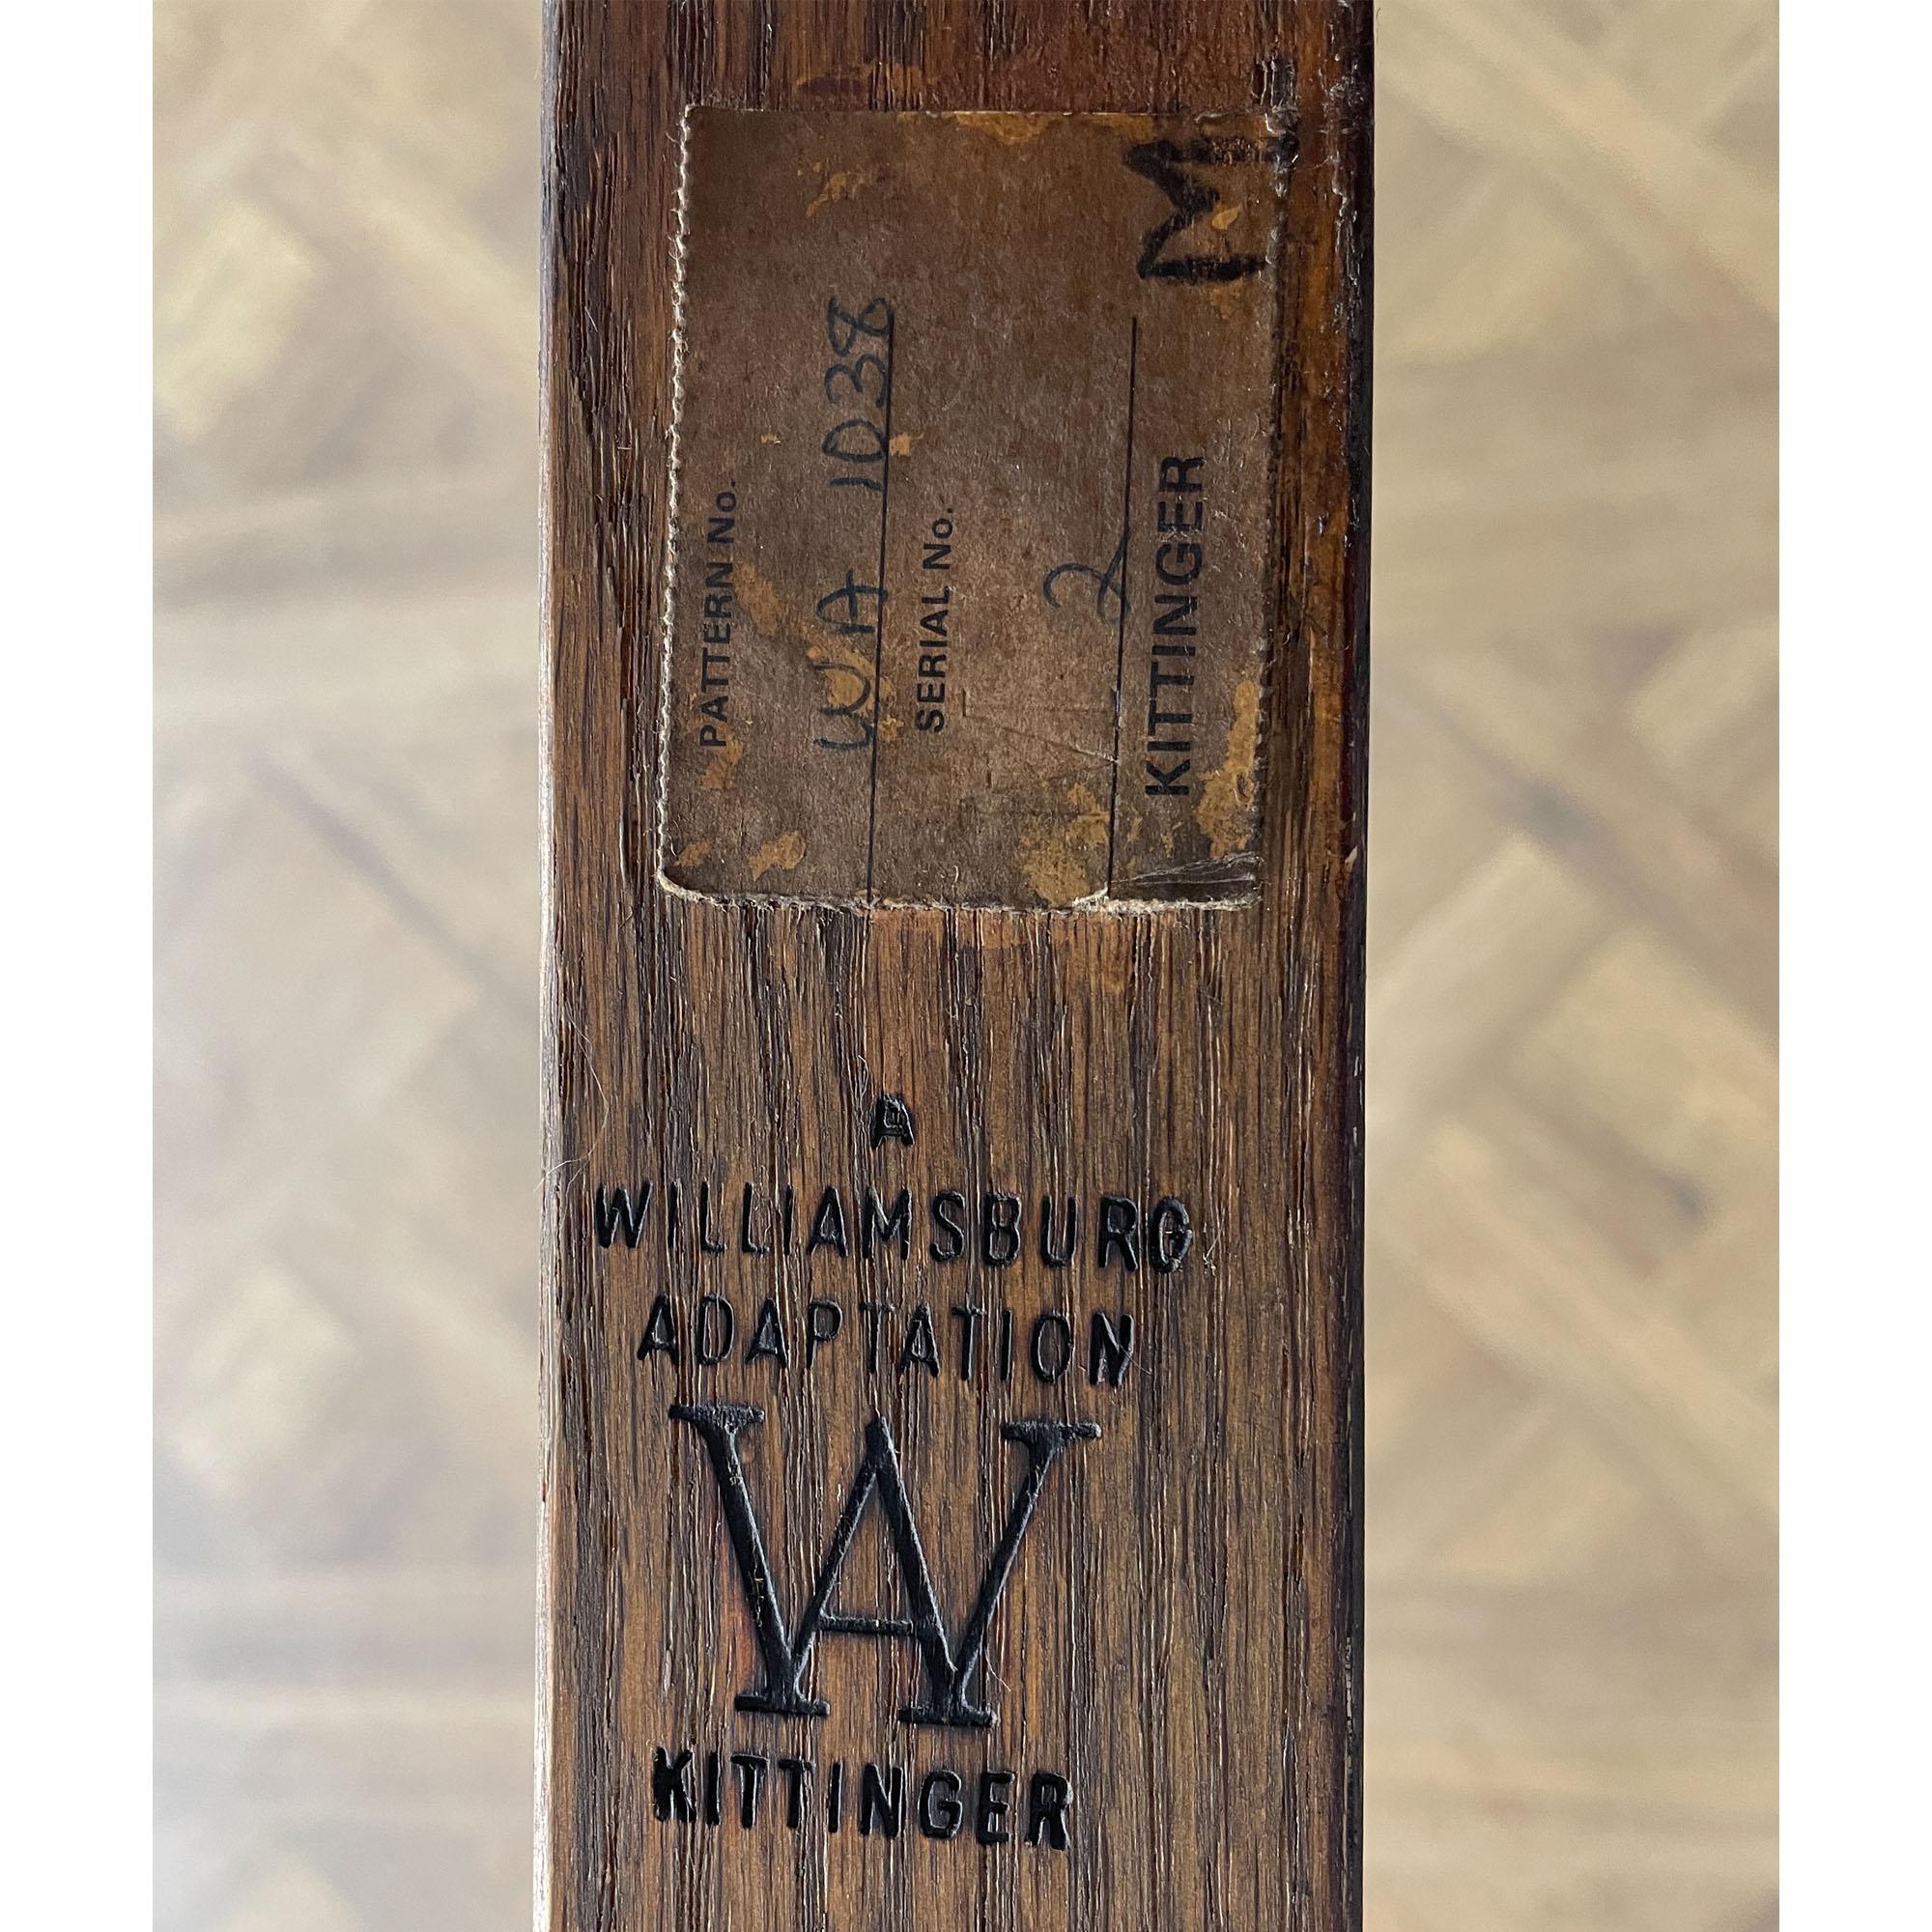 A fine quality Vintage Kittinger Mahogany Wall Shelf with a rich brown color similar to that found on currently produced pieces of Kittinger furniture. Kittinger Furniture is a proudly American company still in operation in Buffalo New York.